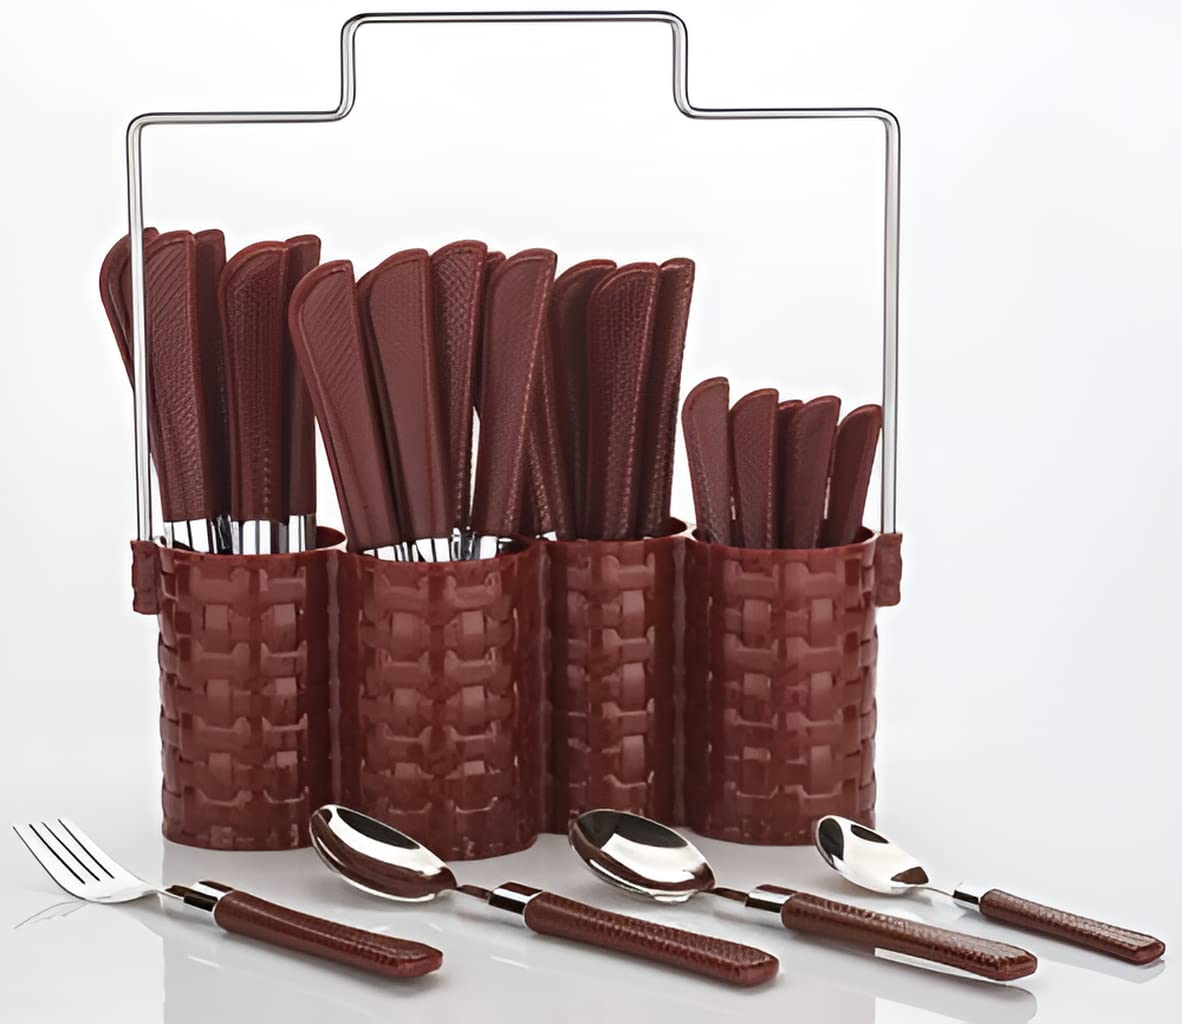 Plantex Cutlery Set/Spoon Set/Spoon Stand for Kitchen and Dining - 25 Pieces - Brown